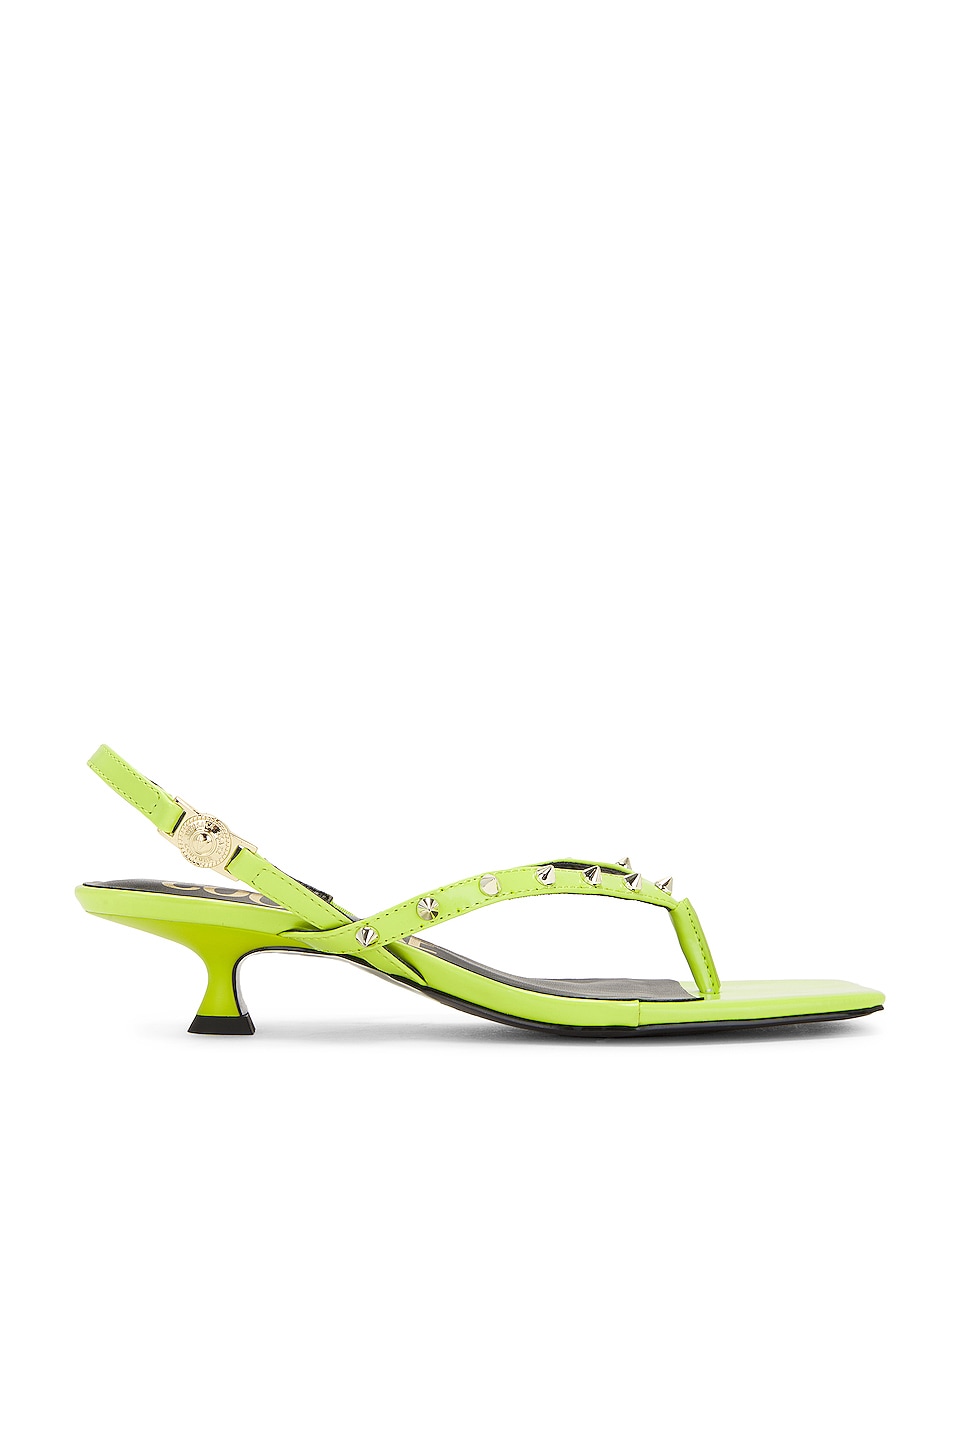 Versace Jeans Couture Courtney Sandals in Lime | REVOLVE